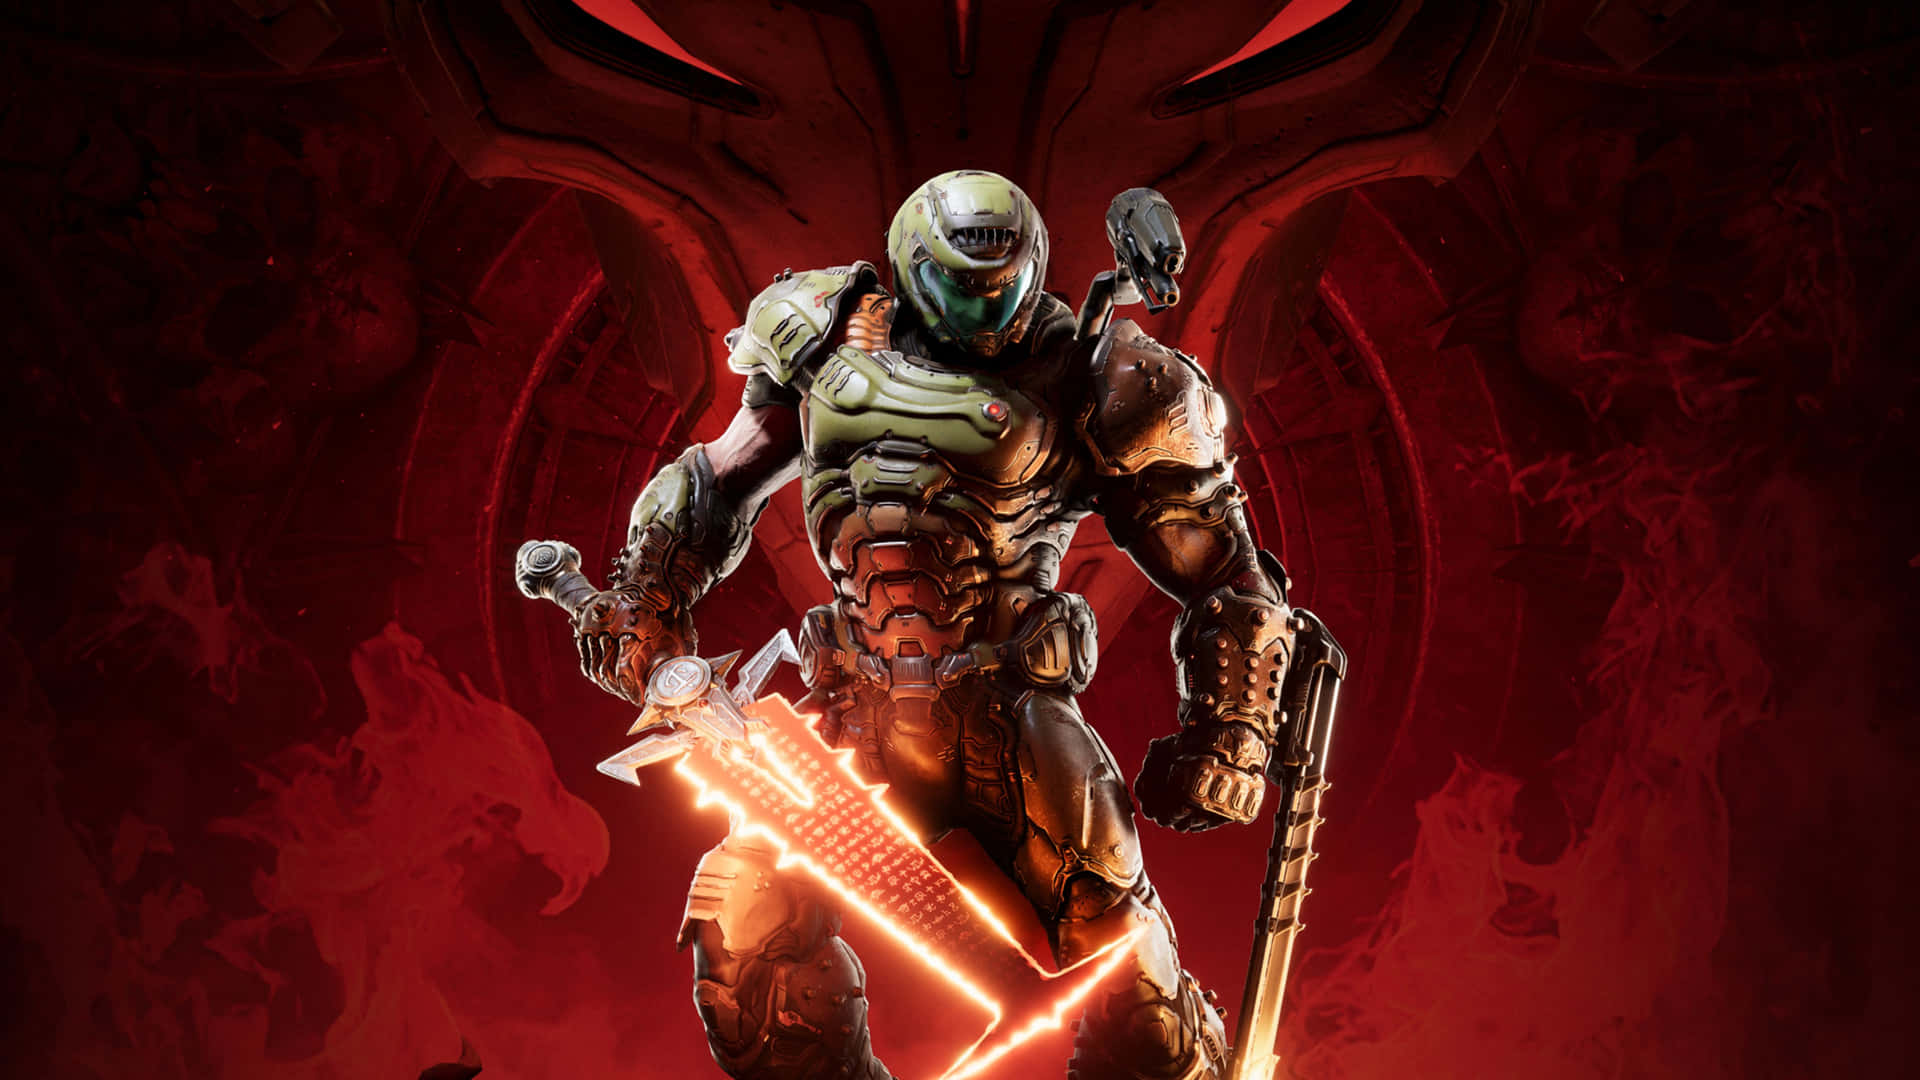 Doom - A Character With A Sword And A Red Light